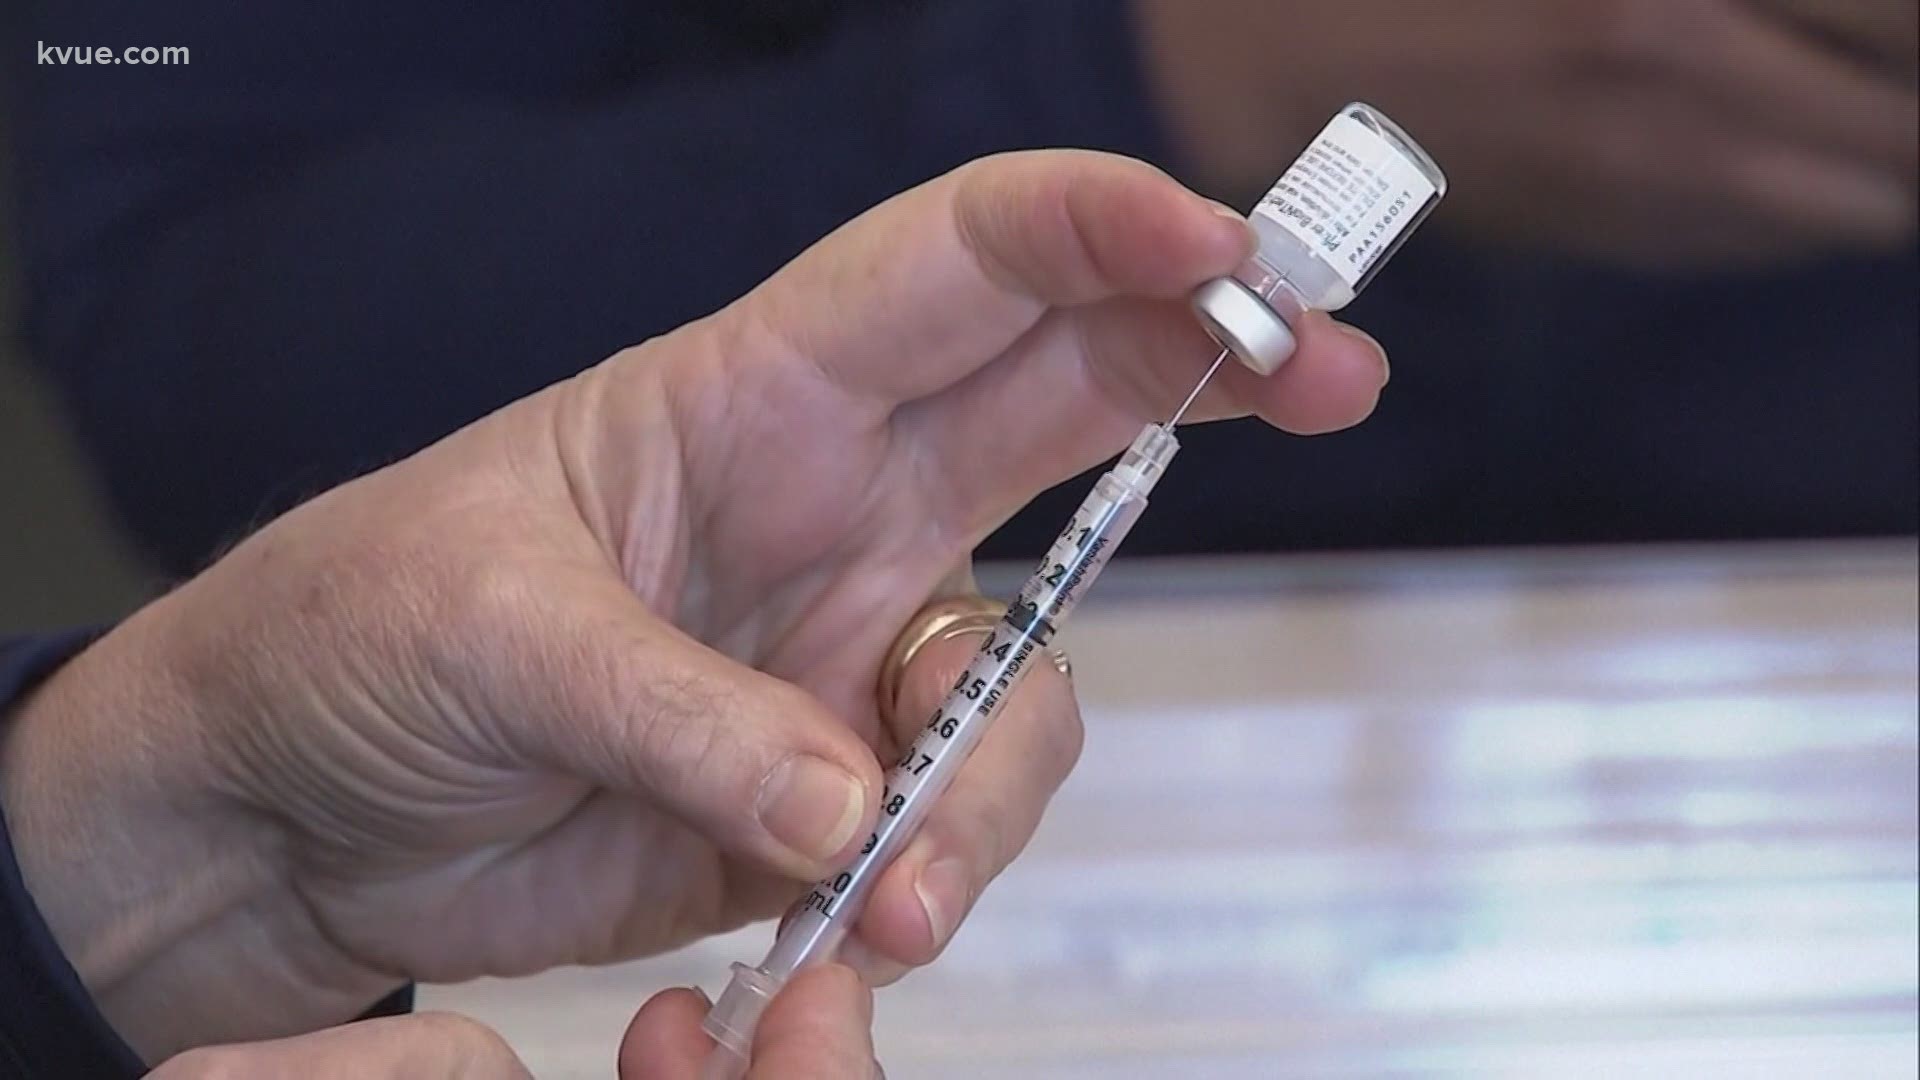 The State announced that some Pfizer vaccines expected to be delivered Monday will arrive Tuesday.